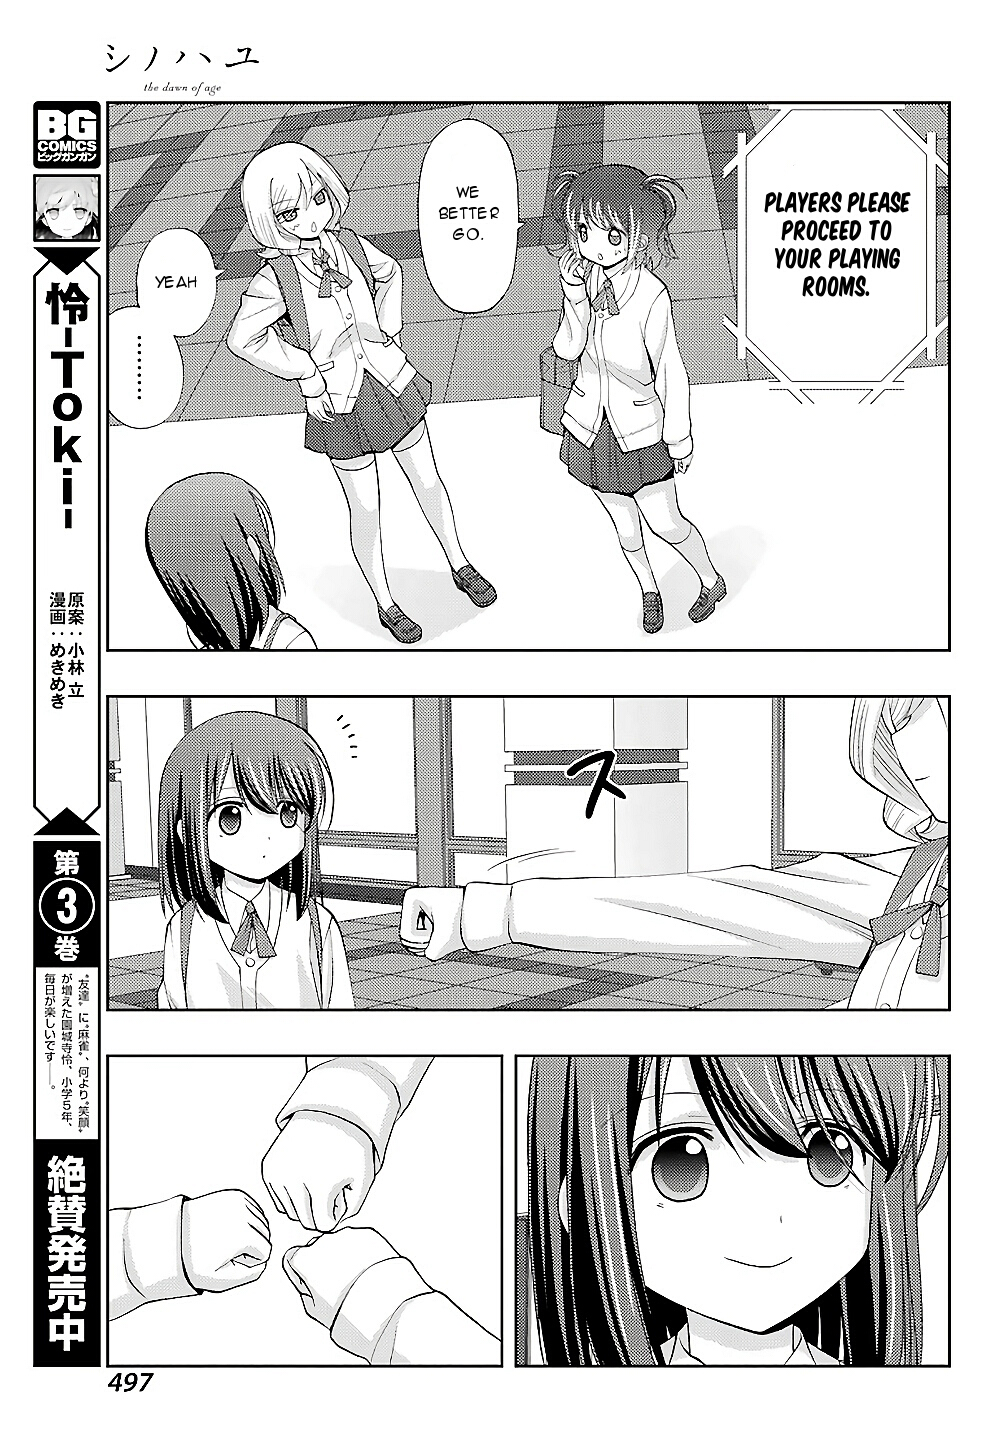 Side Story of Saki Shinohayu the Dawn of Age Ch. 58 Unexpected Turn